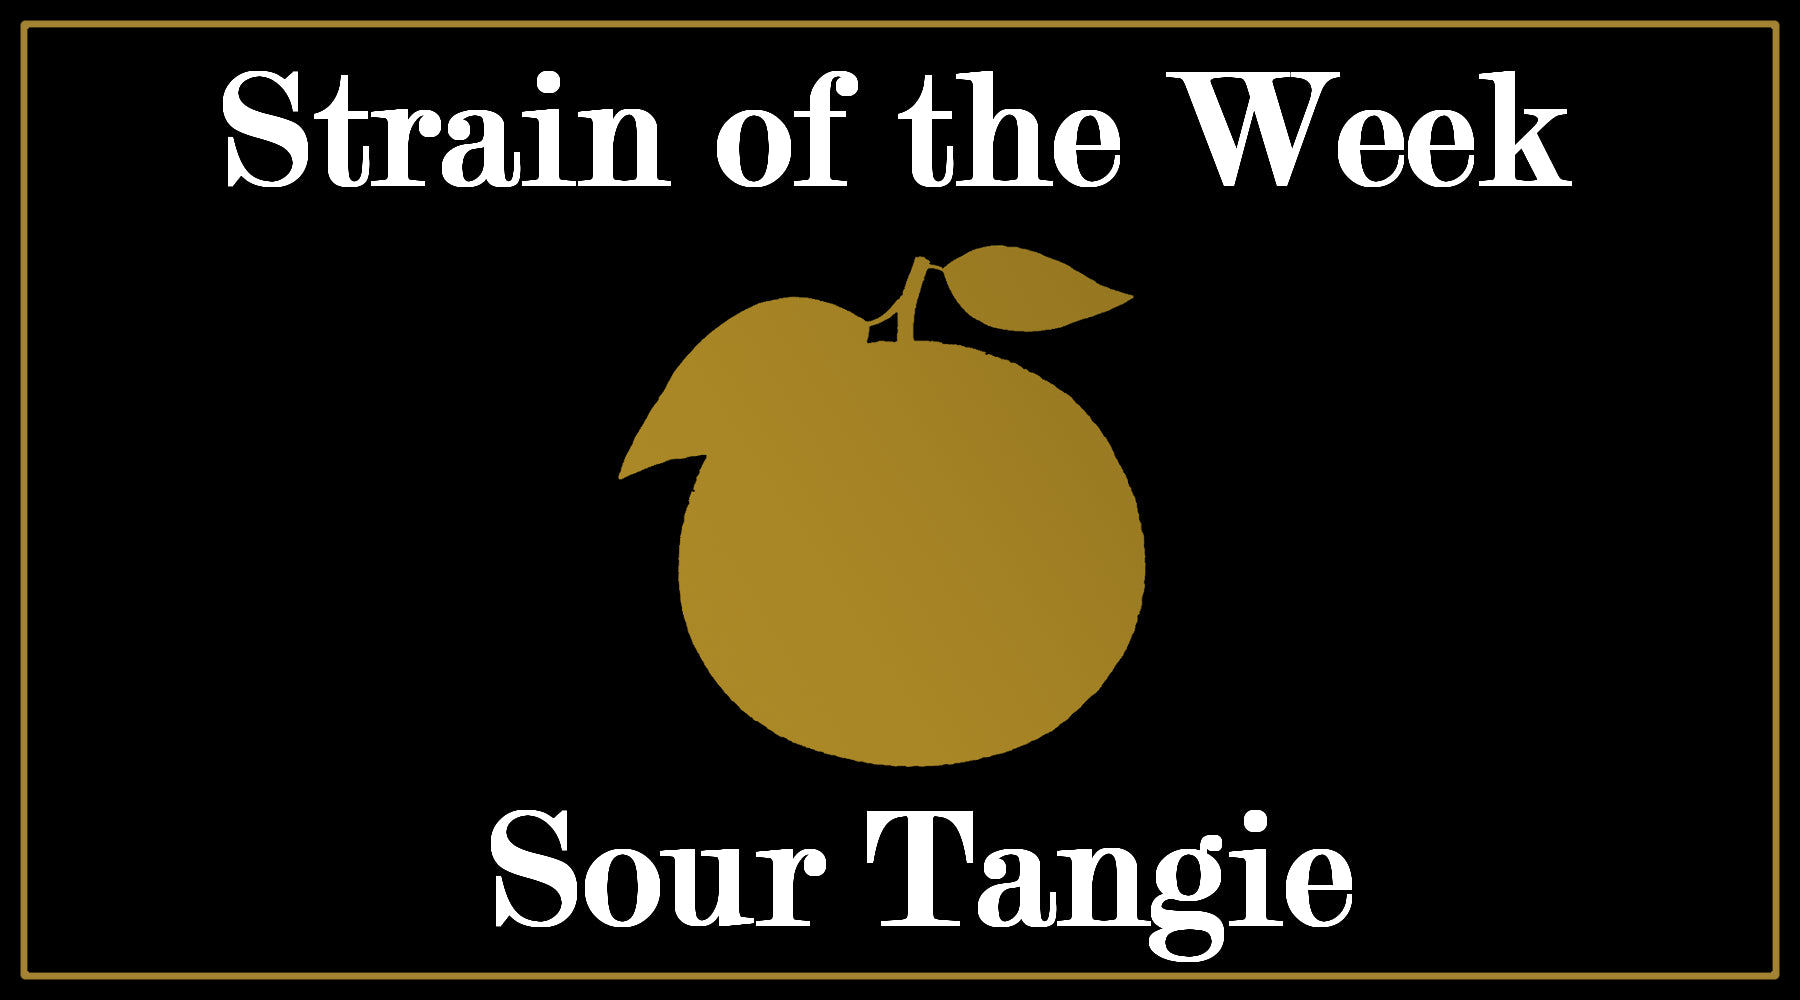 Strain of the Week: Sour Tangie